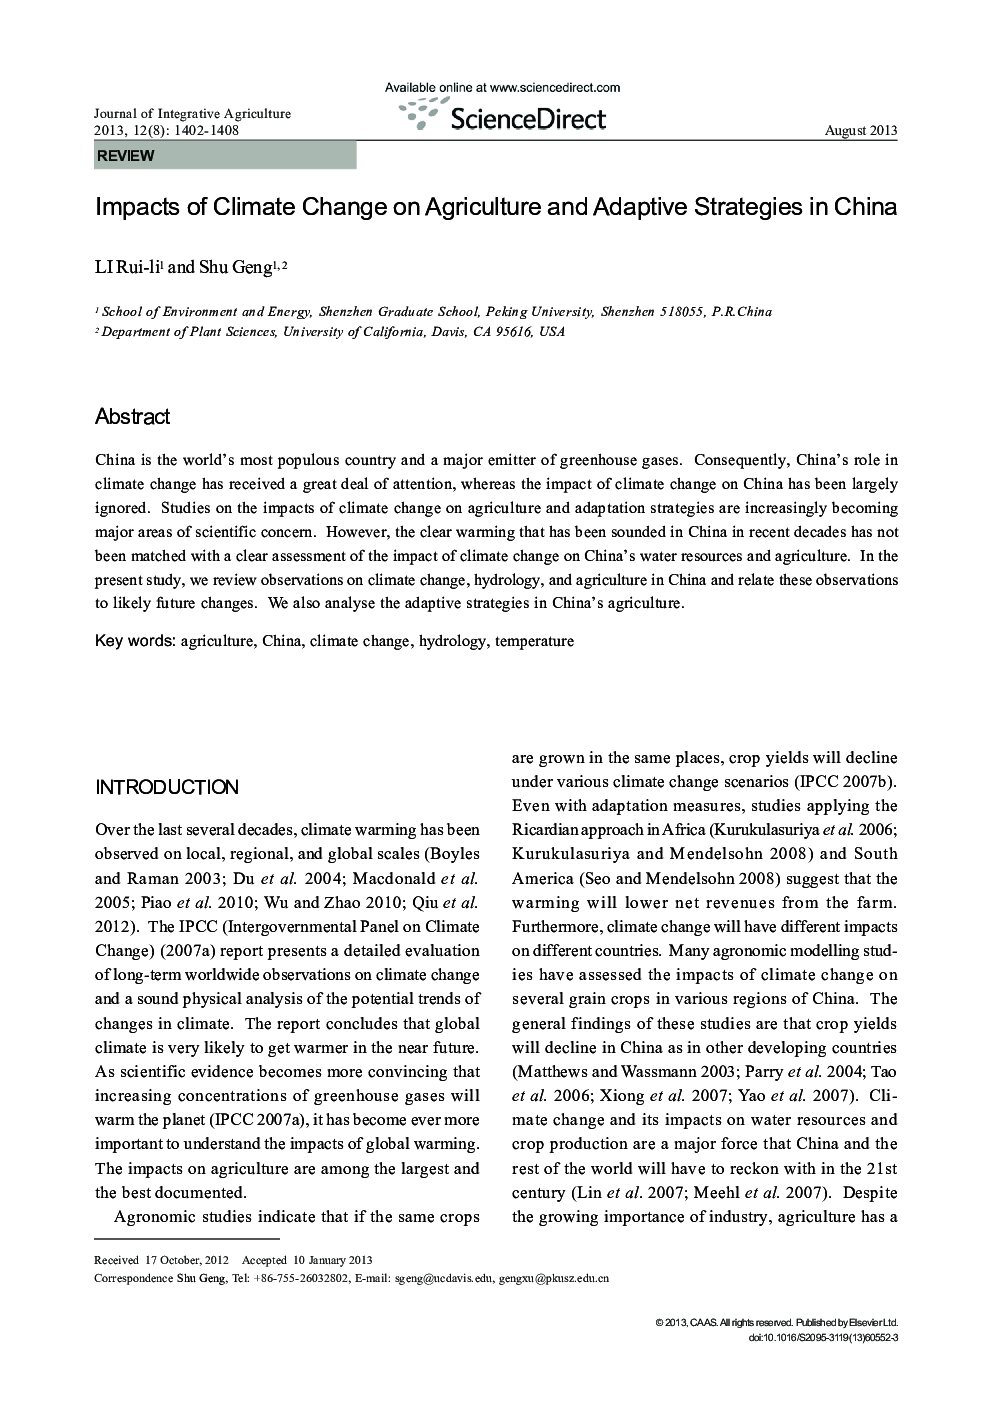 Impacts of Climate Change on Agriculture and Adaptive Strategies in China